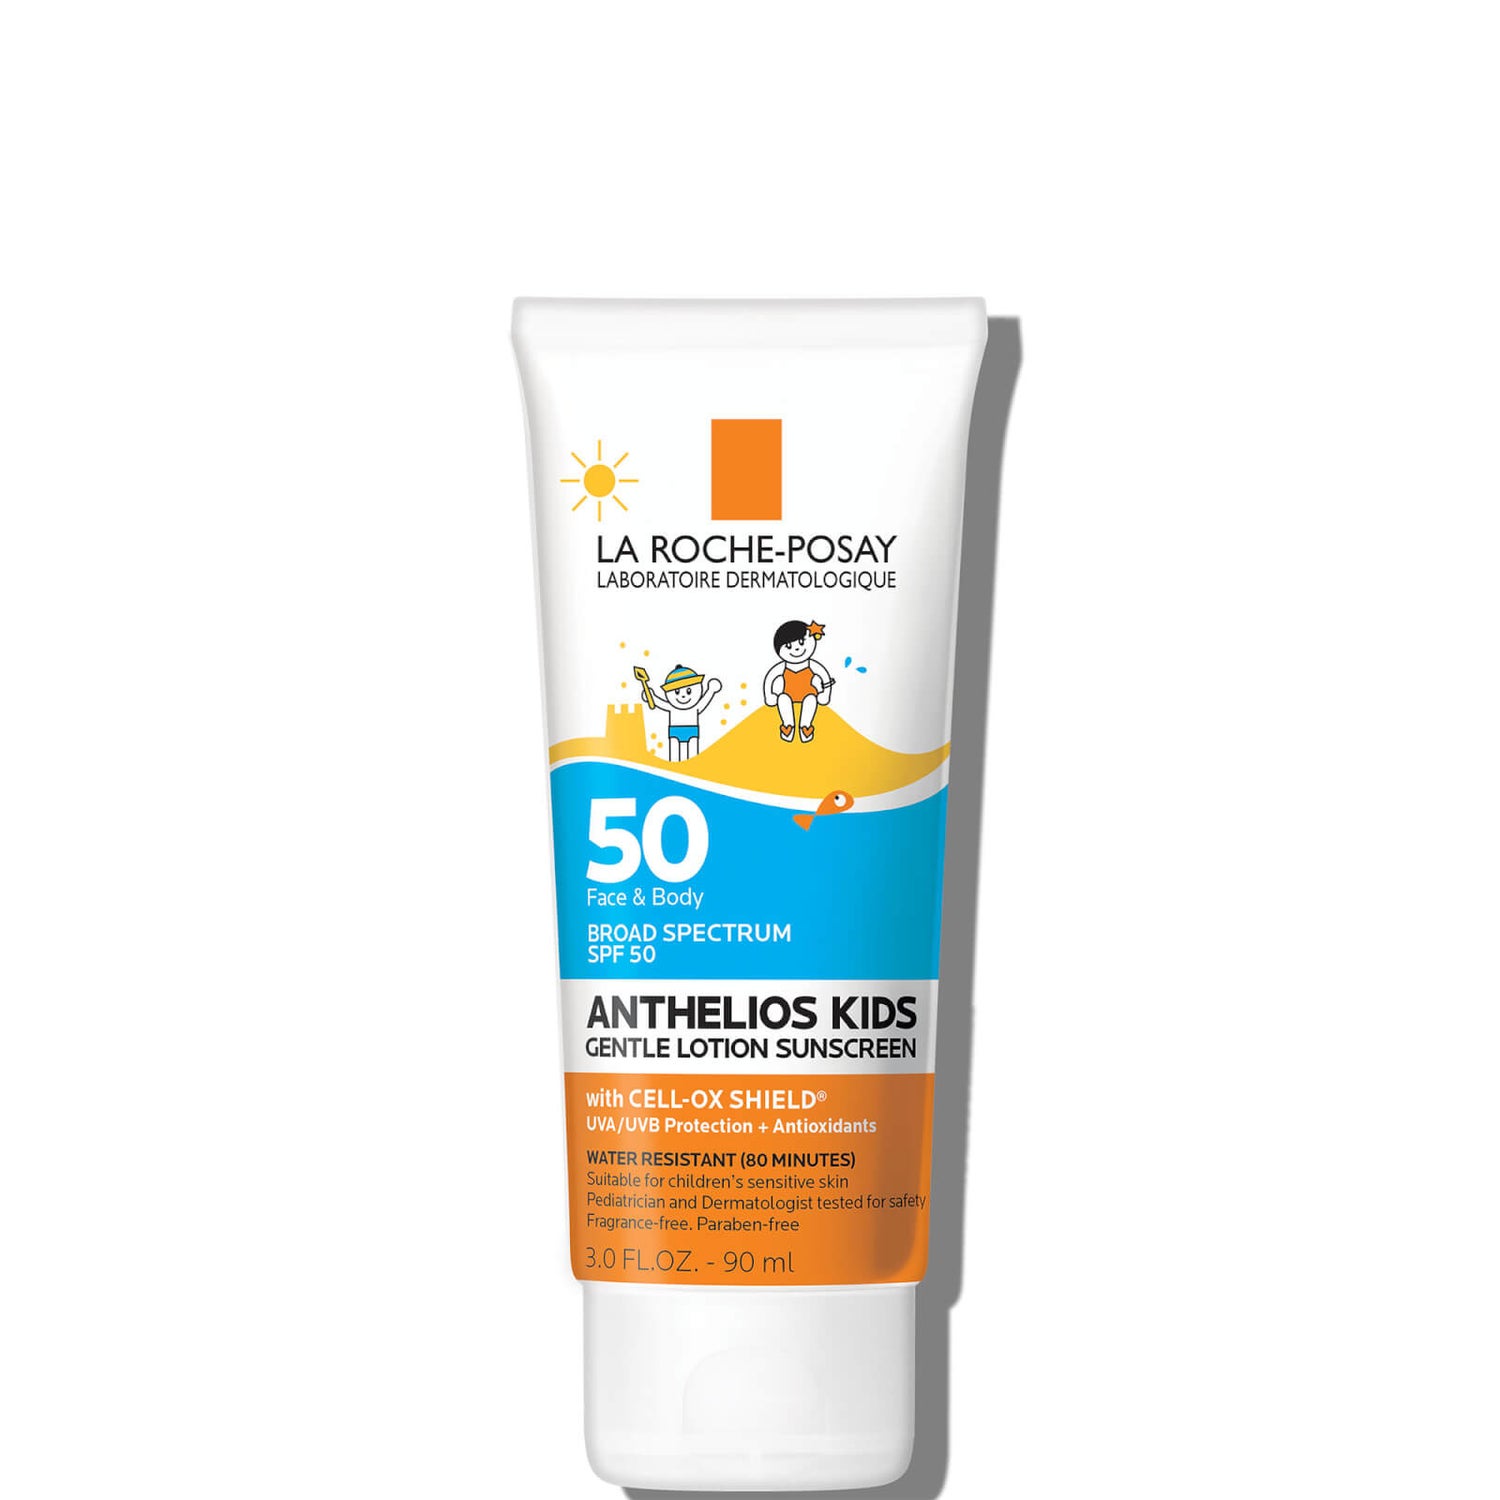 La Roche-Posay Anthelios Kids Gentle Lotion Sunscreen SPF 50 (Various Sizes)